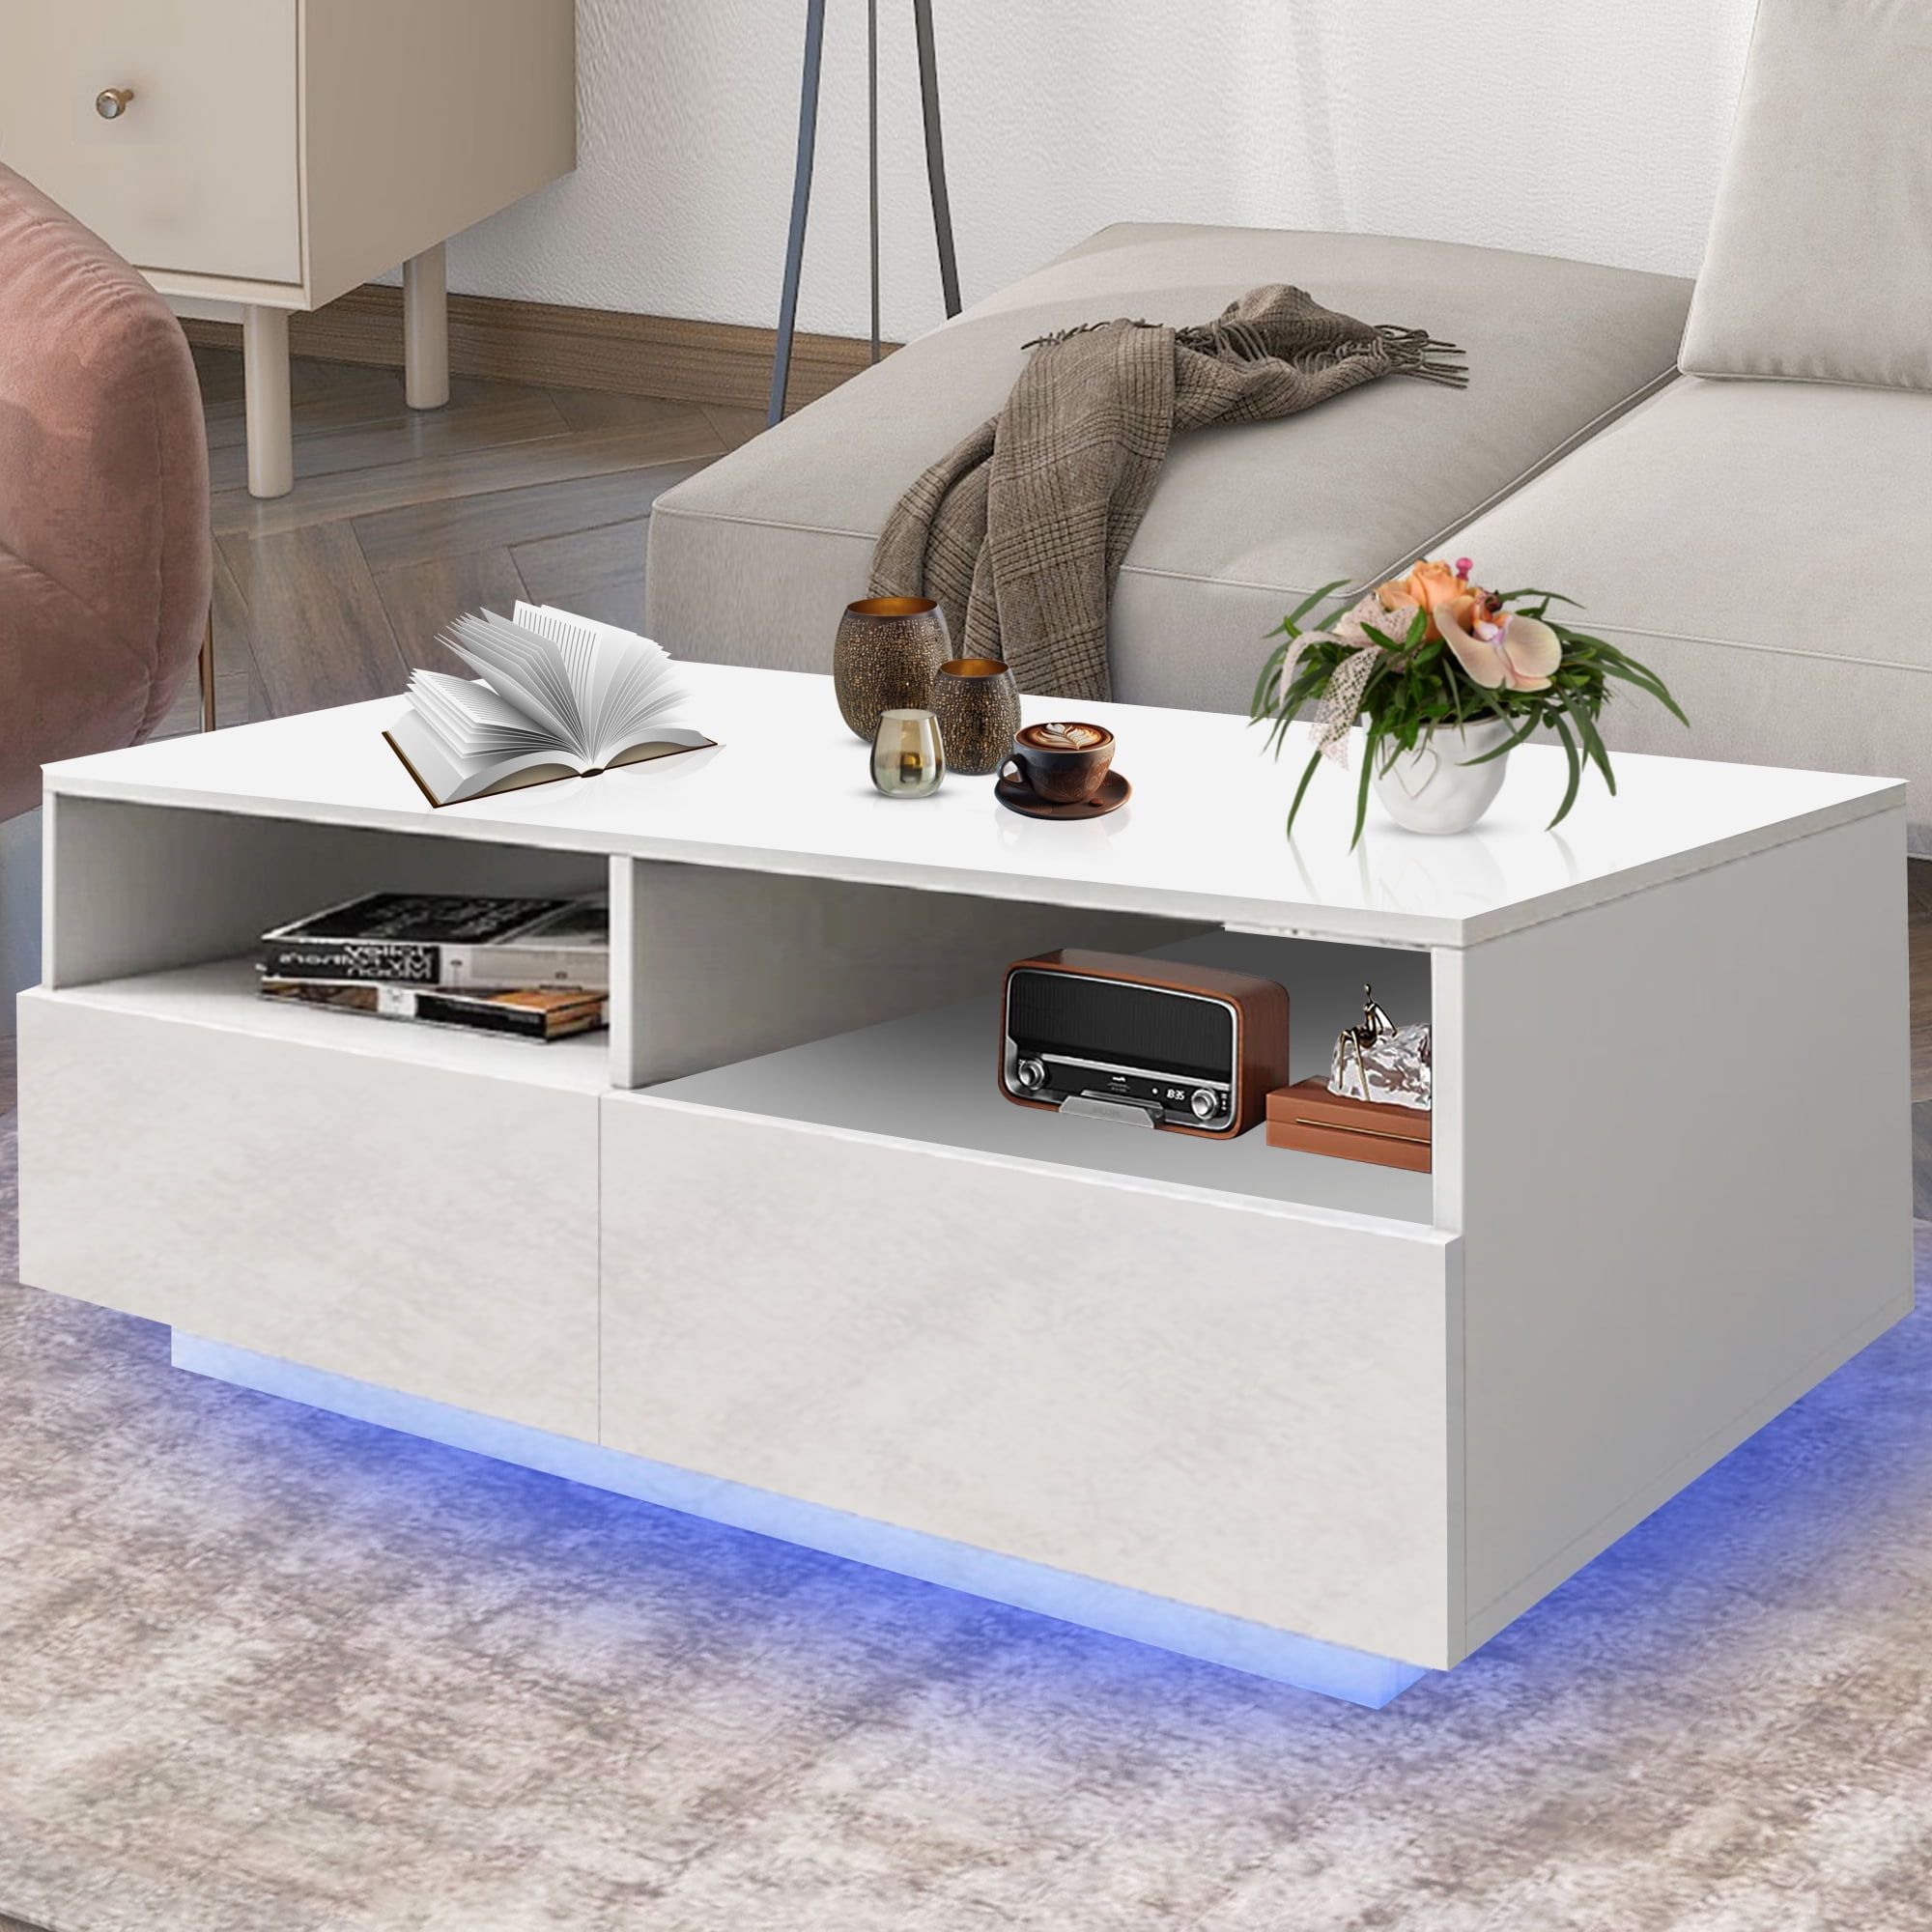 Syngar Led Coffee Table With 4 Storage Sliding Drawers And Open Shelves,  Modern High Glossy Center Table Rectangular With Multiple Colors Led Lights  For Living Room Bedroom, Easy Assembly, White – Walmart Inside Rectangular Led Coffee Tables (View 5 of 15)